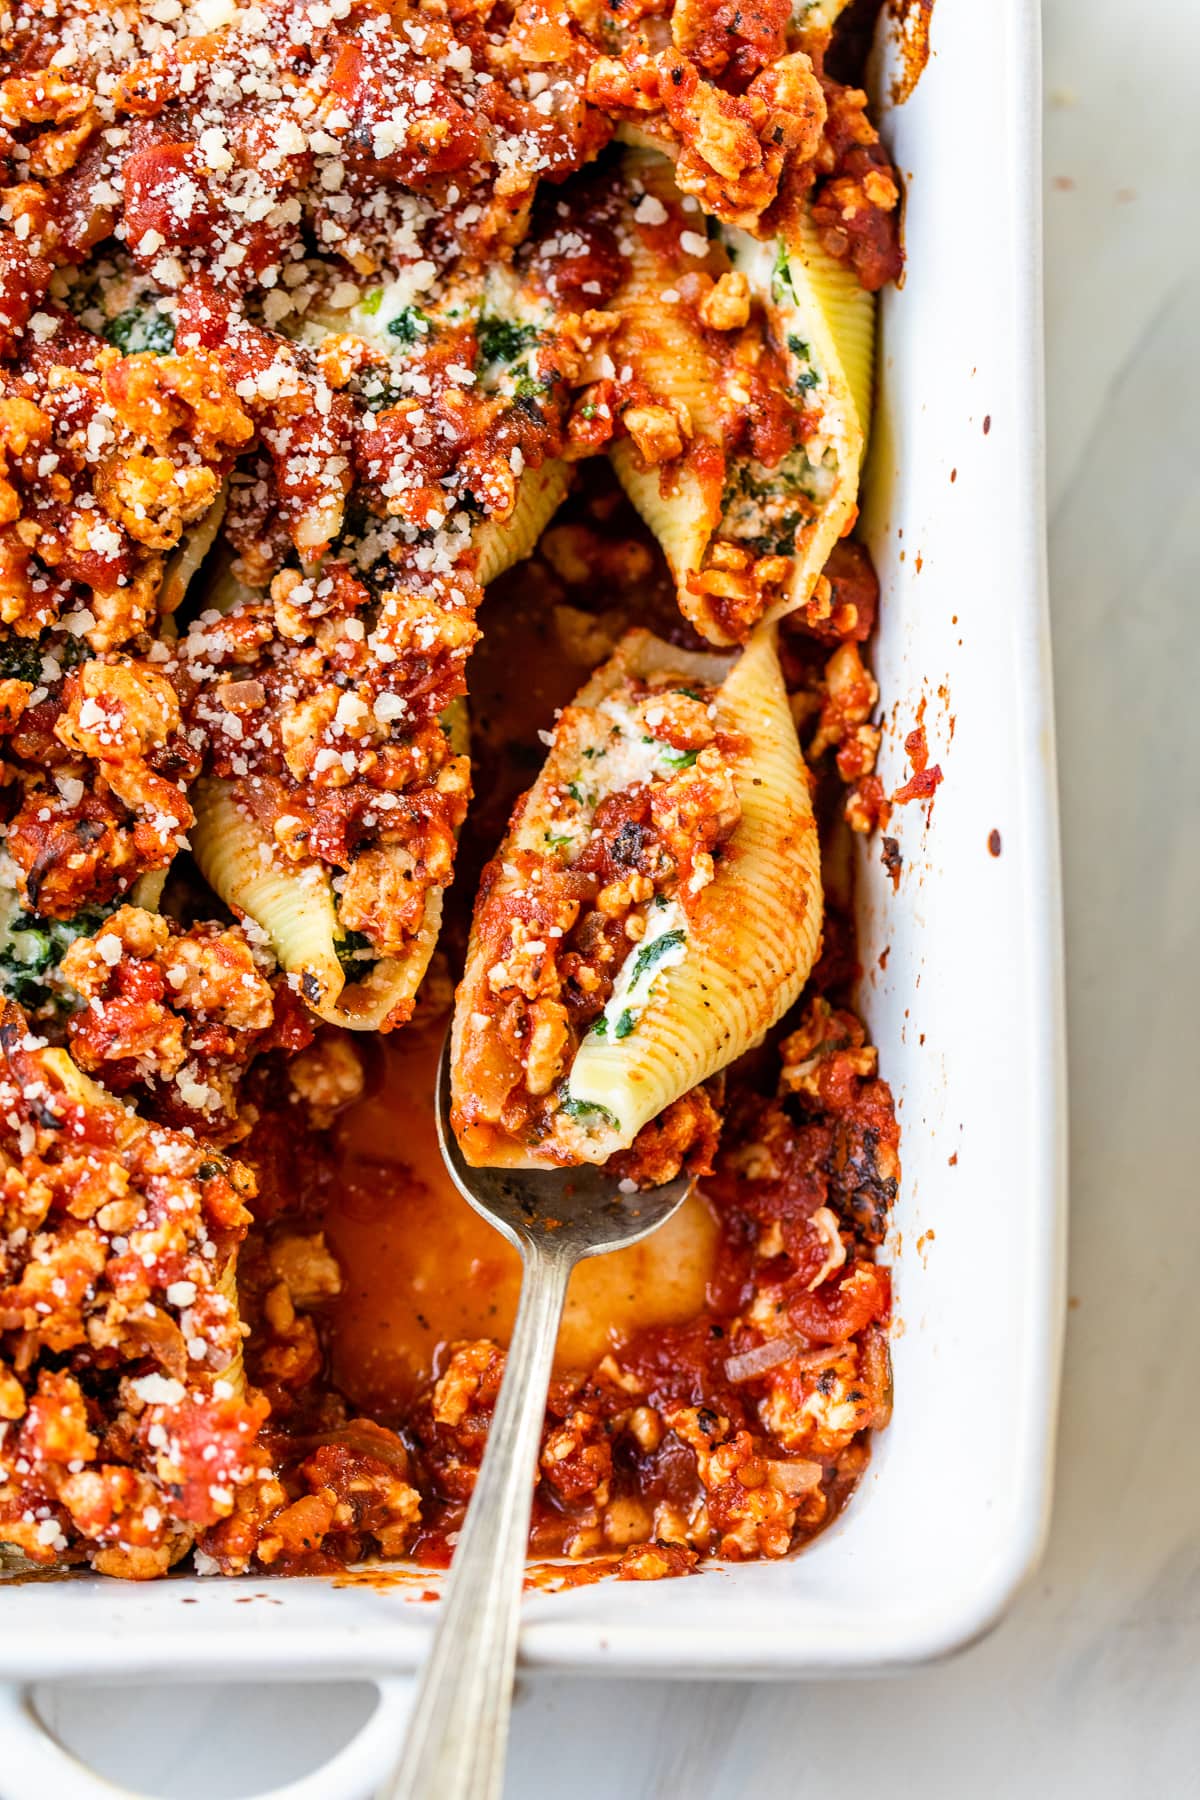 Stuffed Shells with Meat Sauce